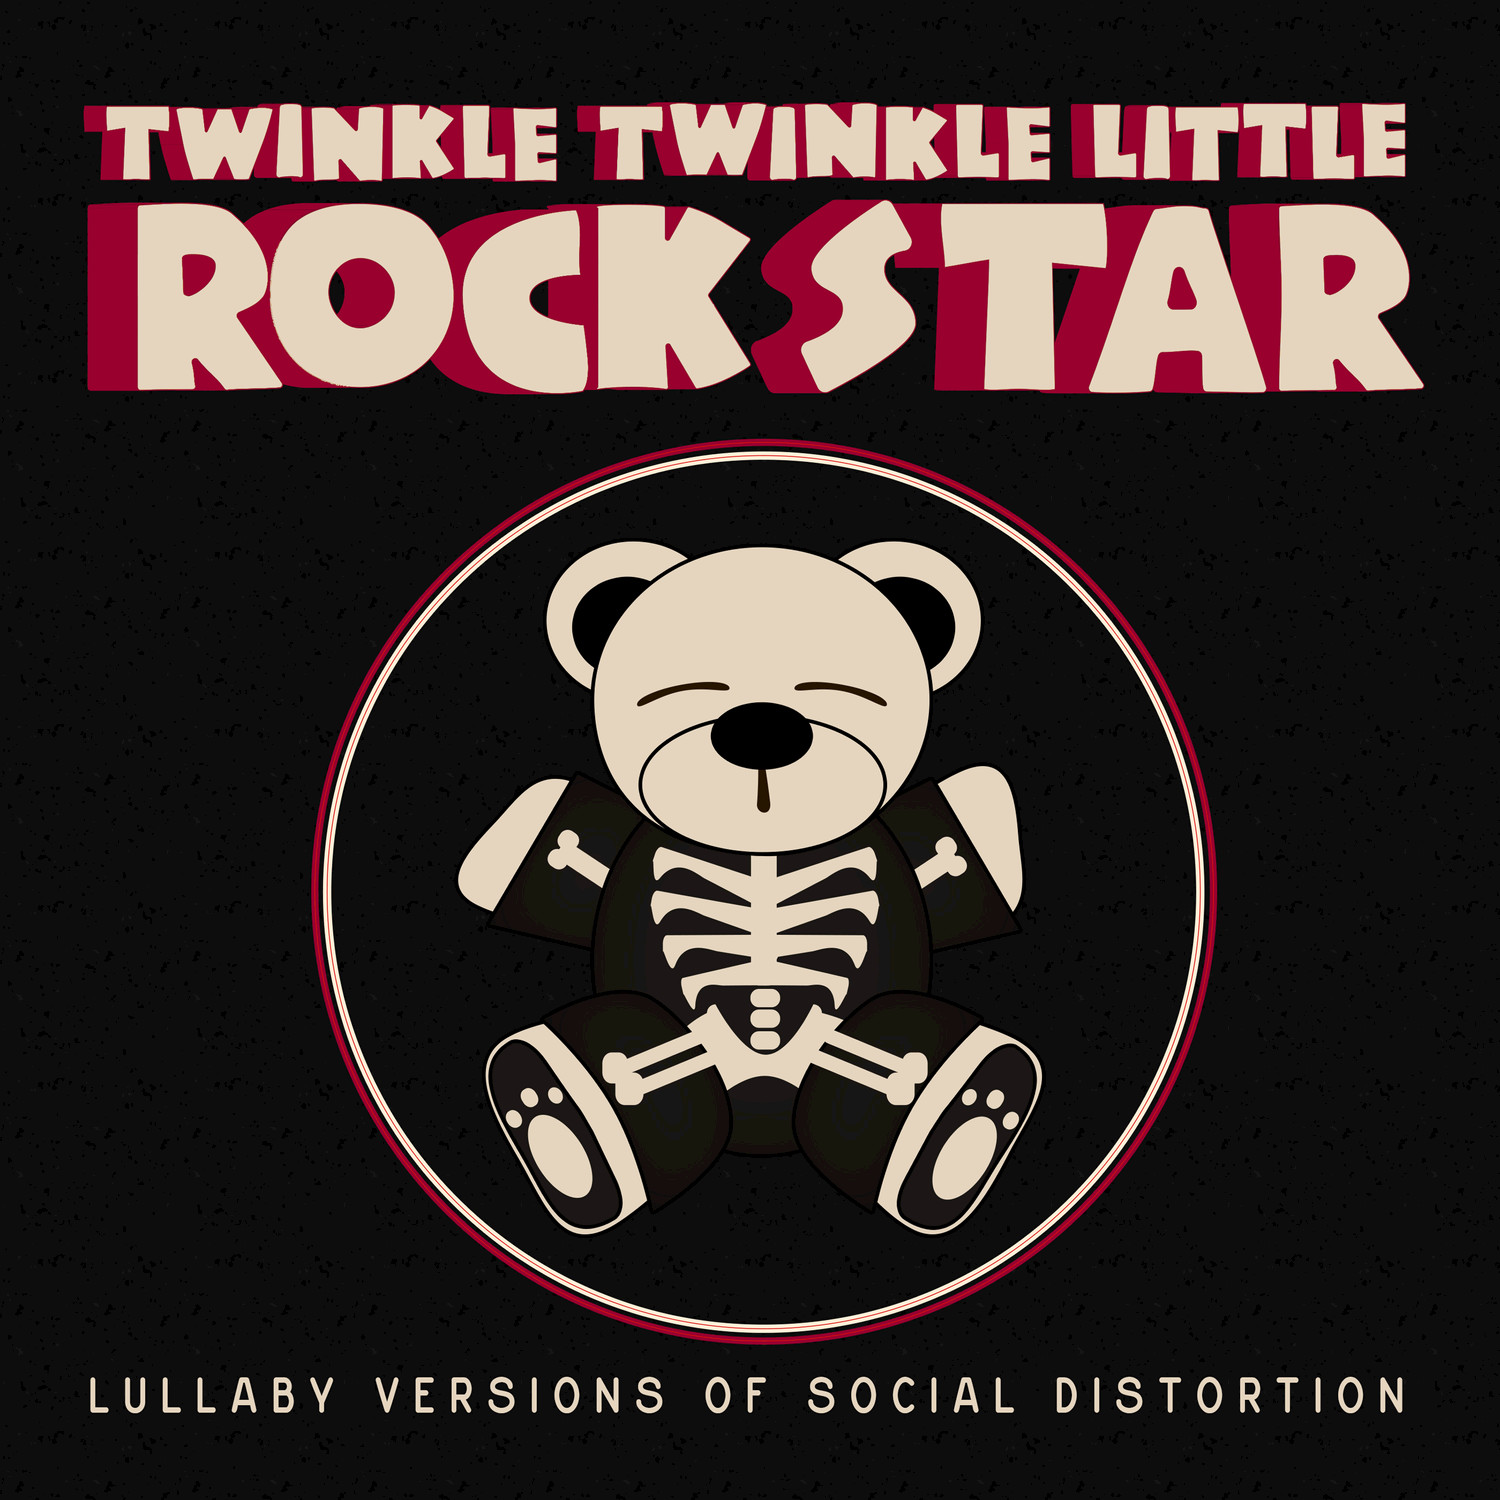 Lullaby Versions of Social Distortion